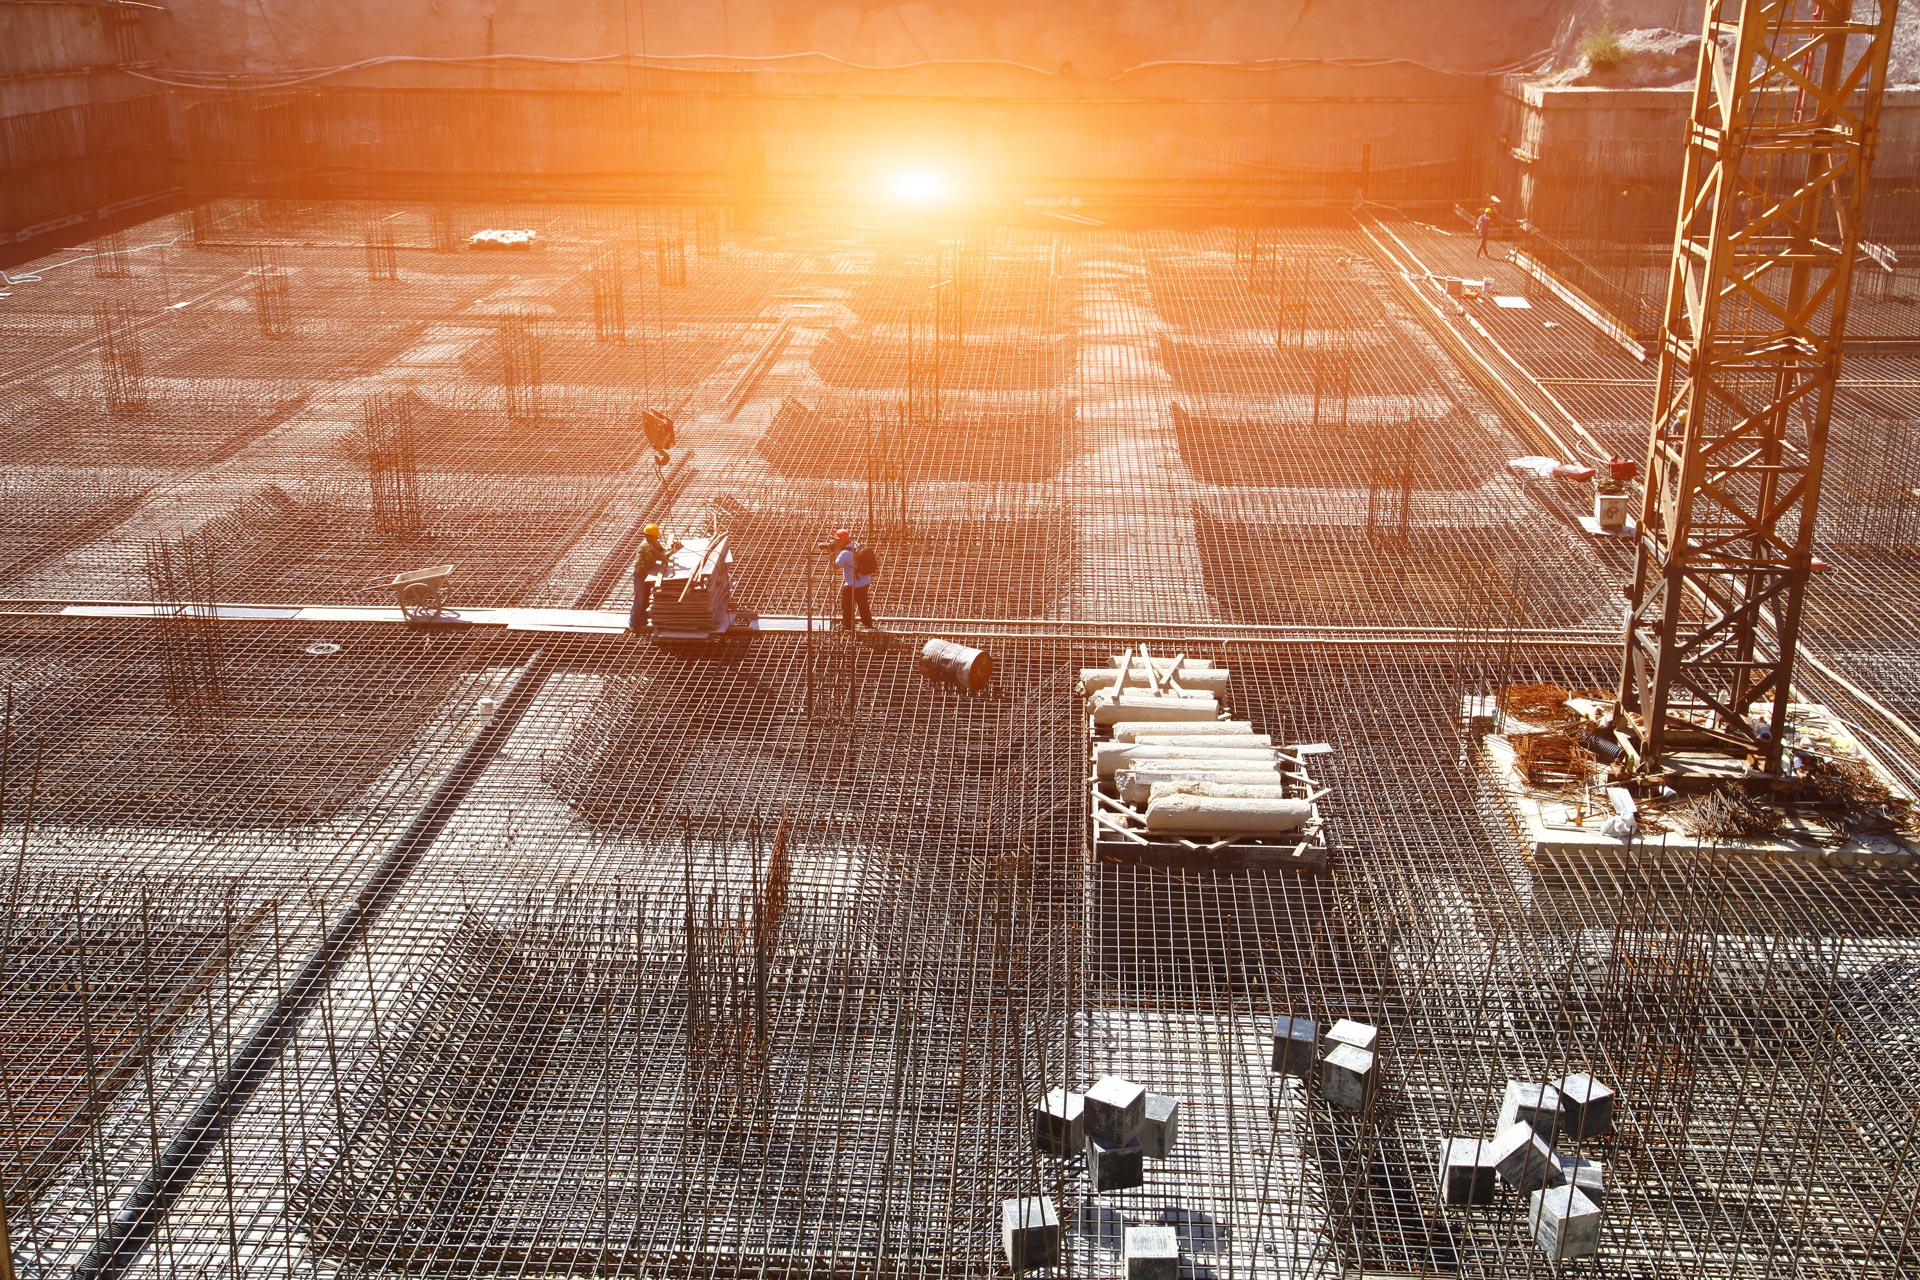 A large construction site with rebar and workers